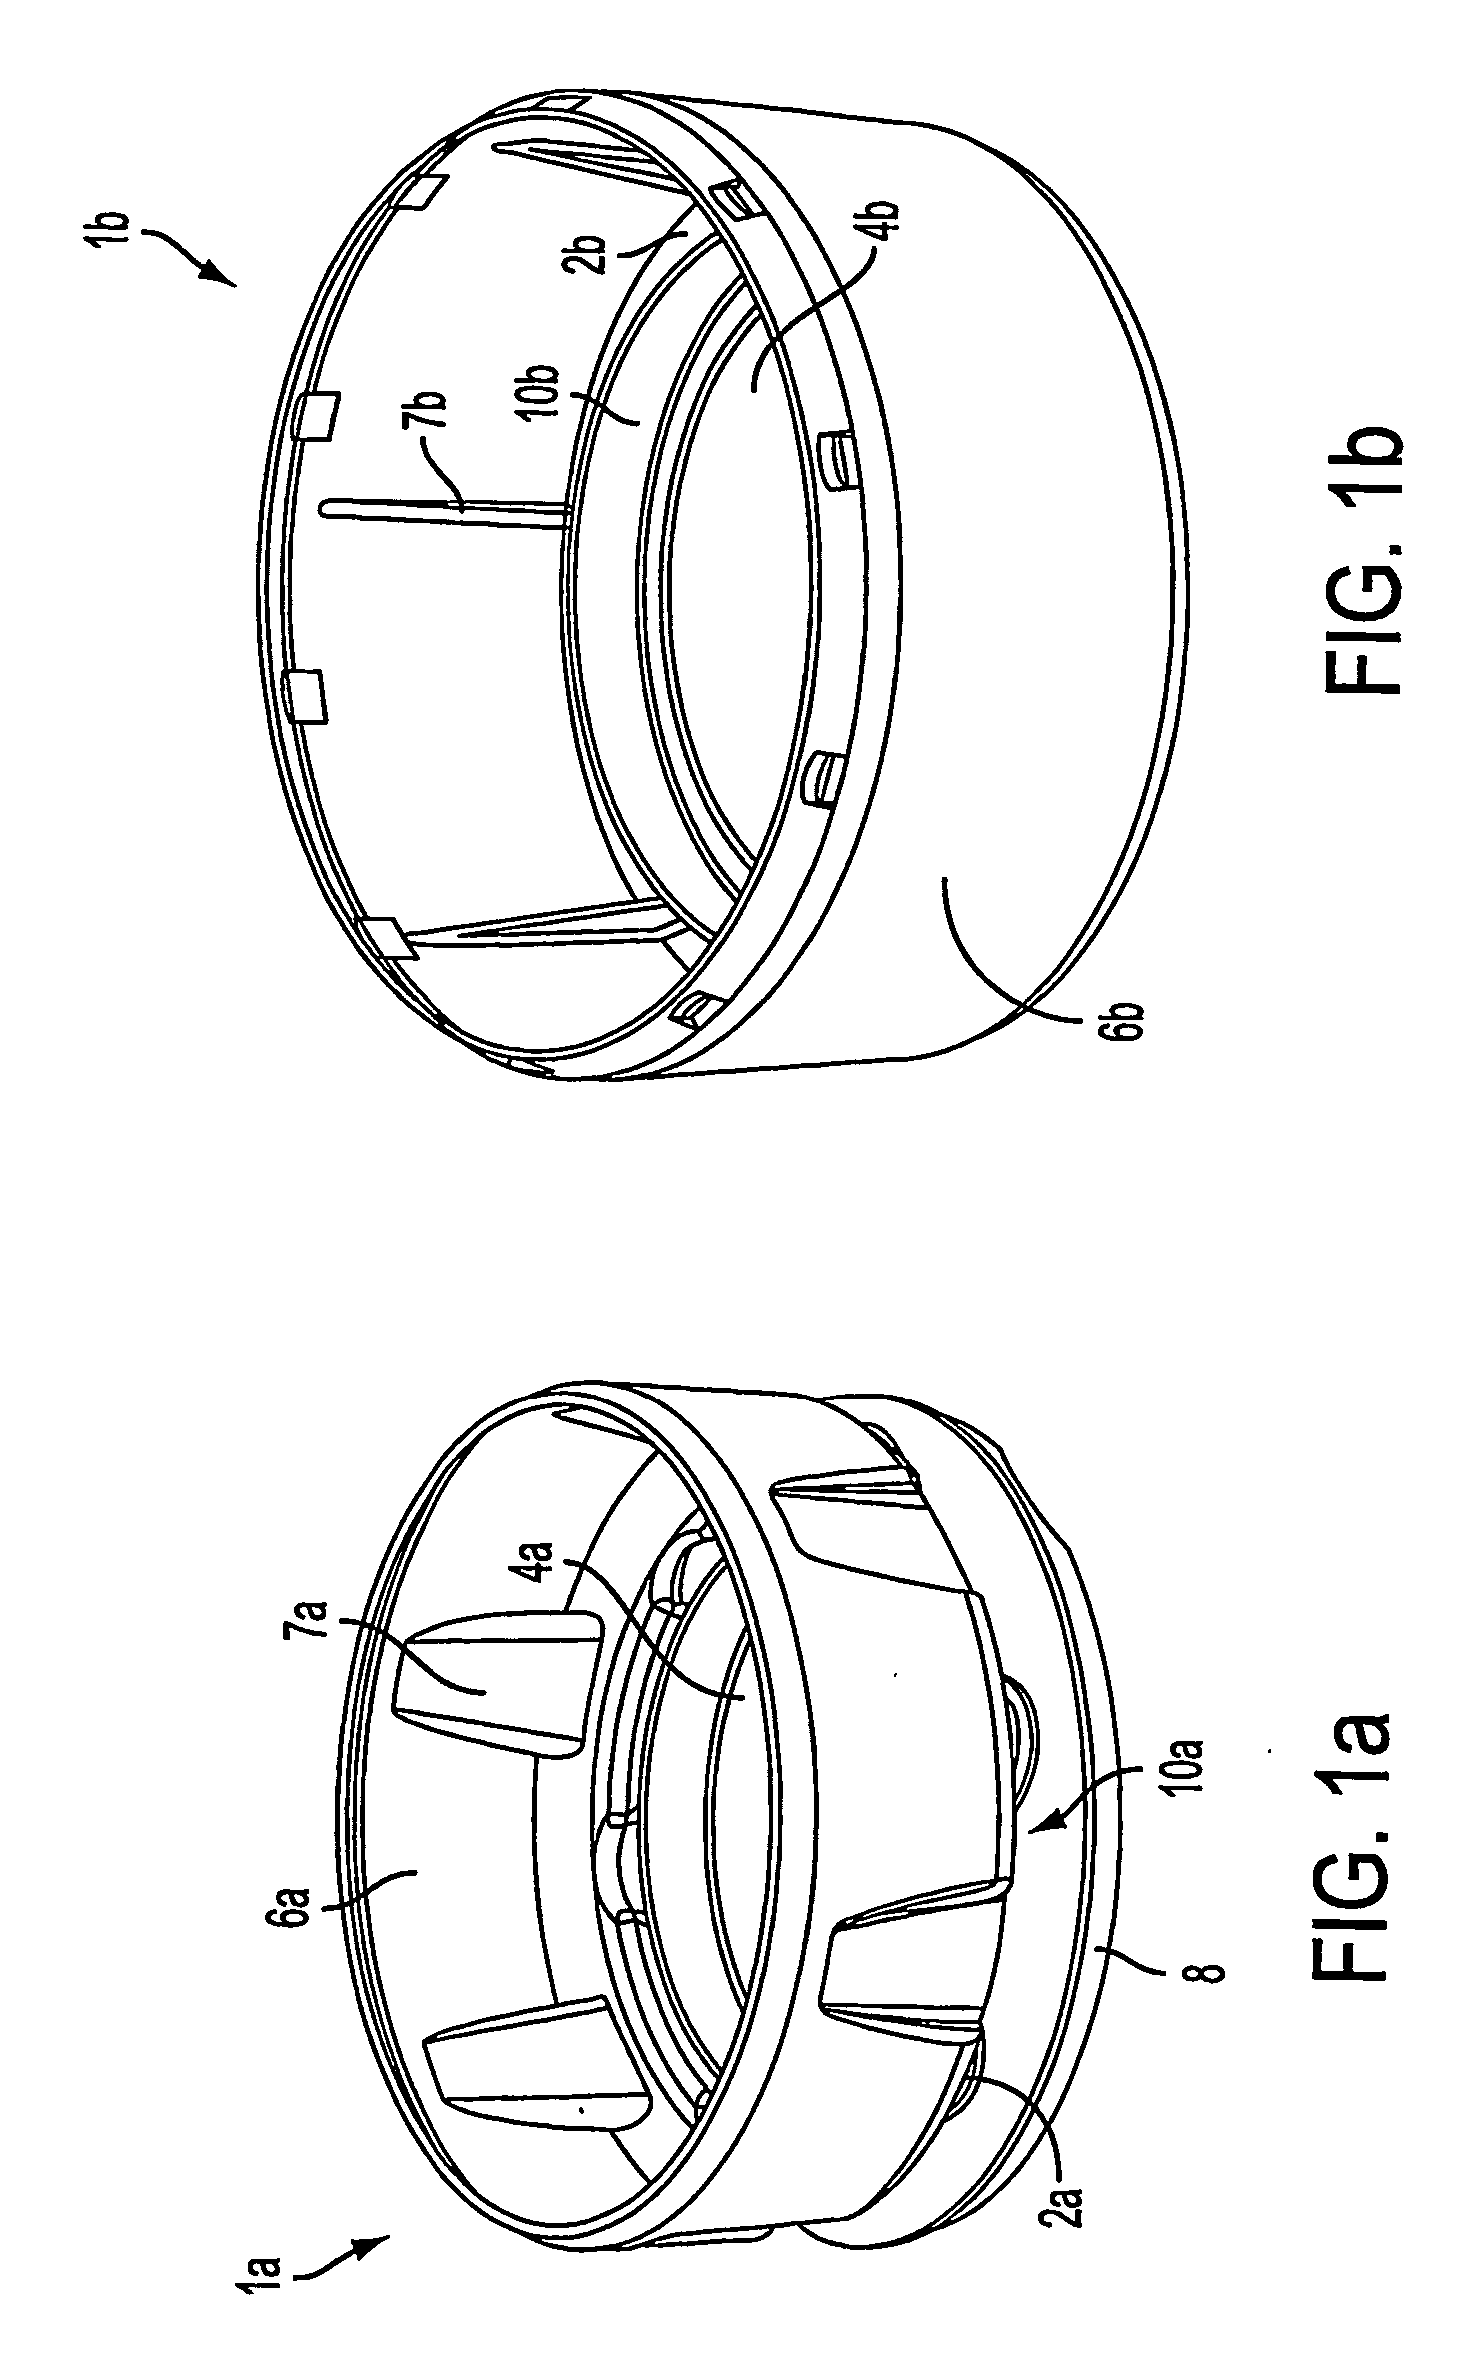 Process and device for conveying odd-shaped containers